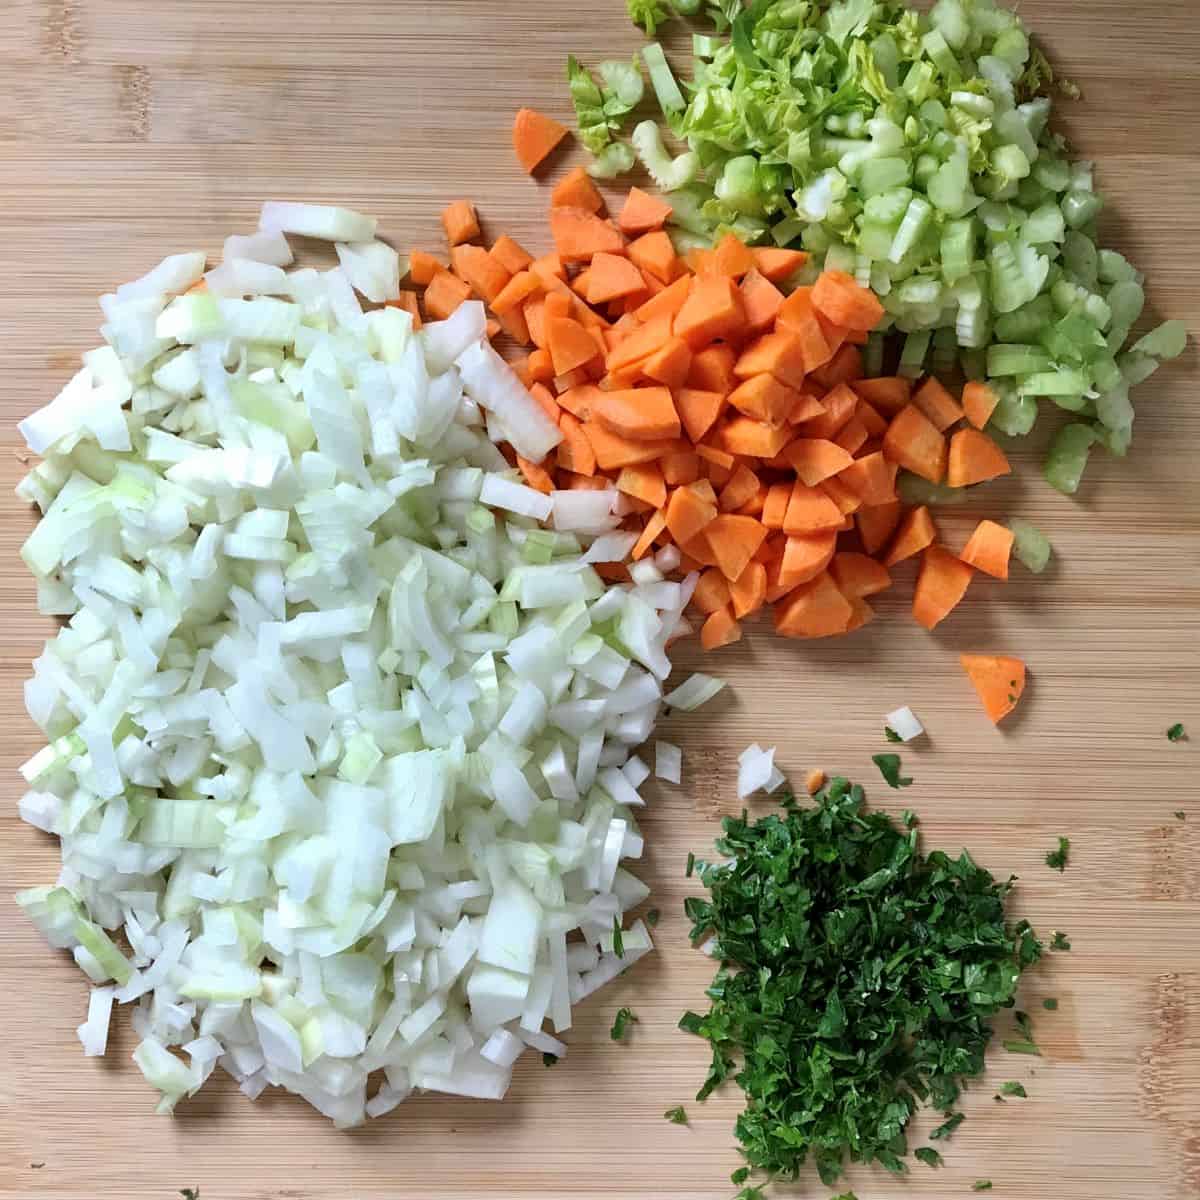 Diced vegetables on a cutting board.